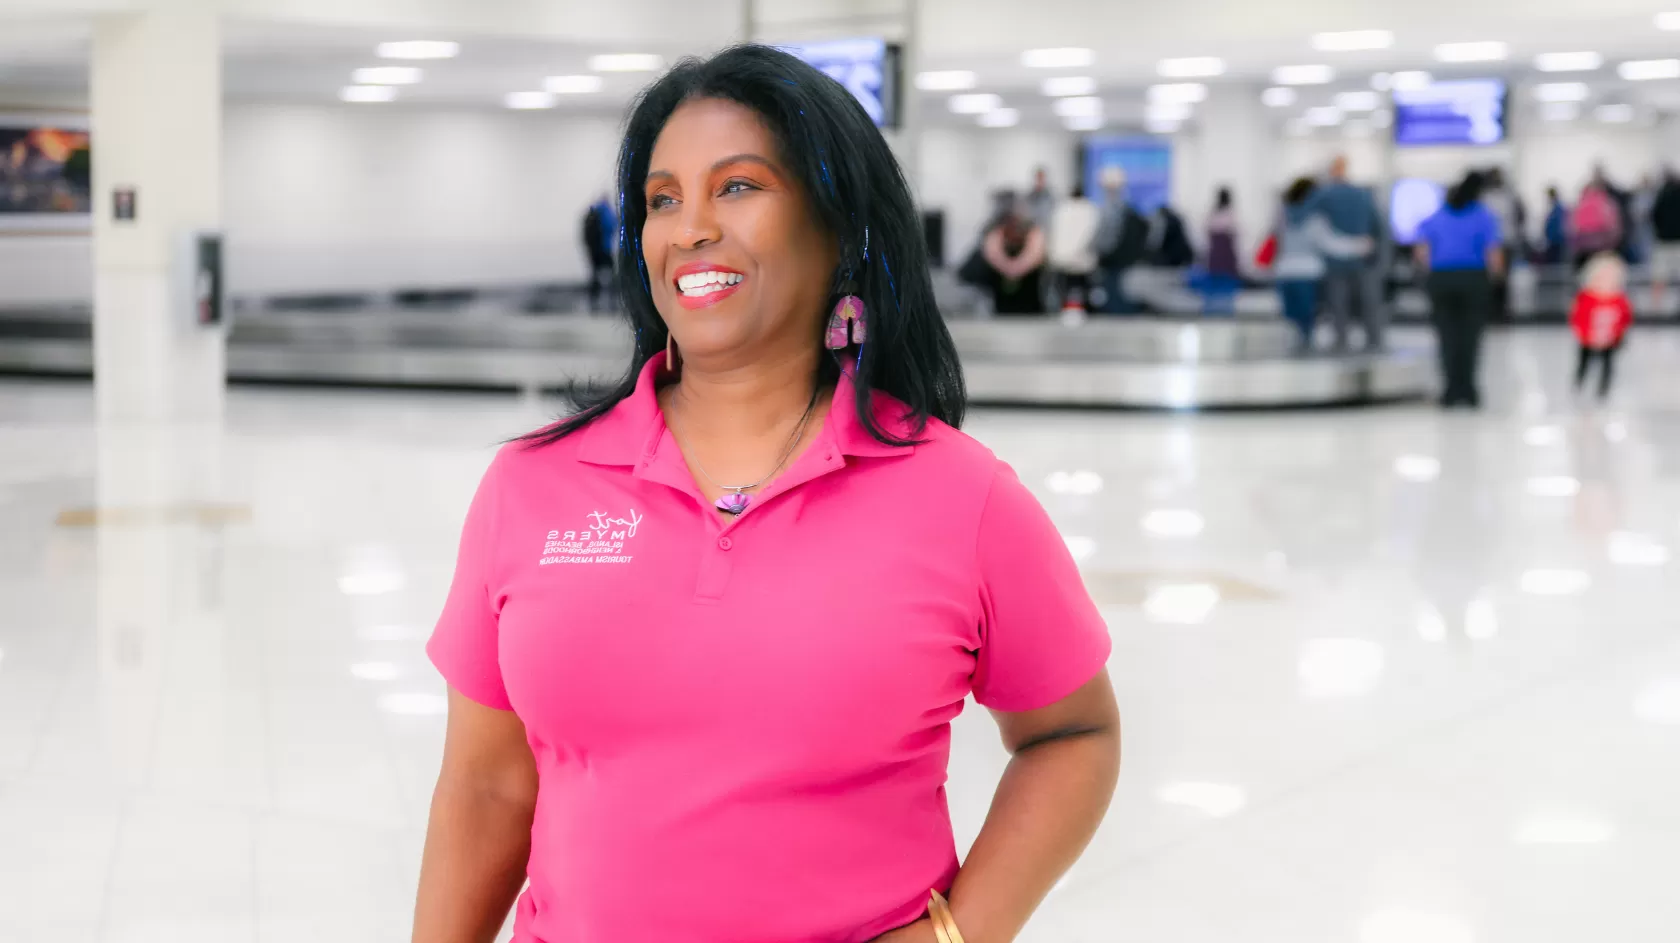 A woman wears a pink shirt and poses near baggage claim at RSW